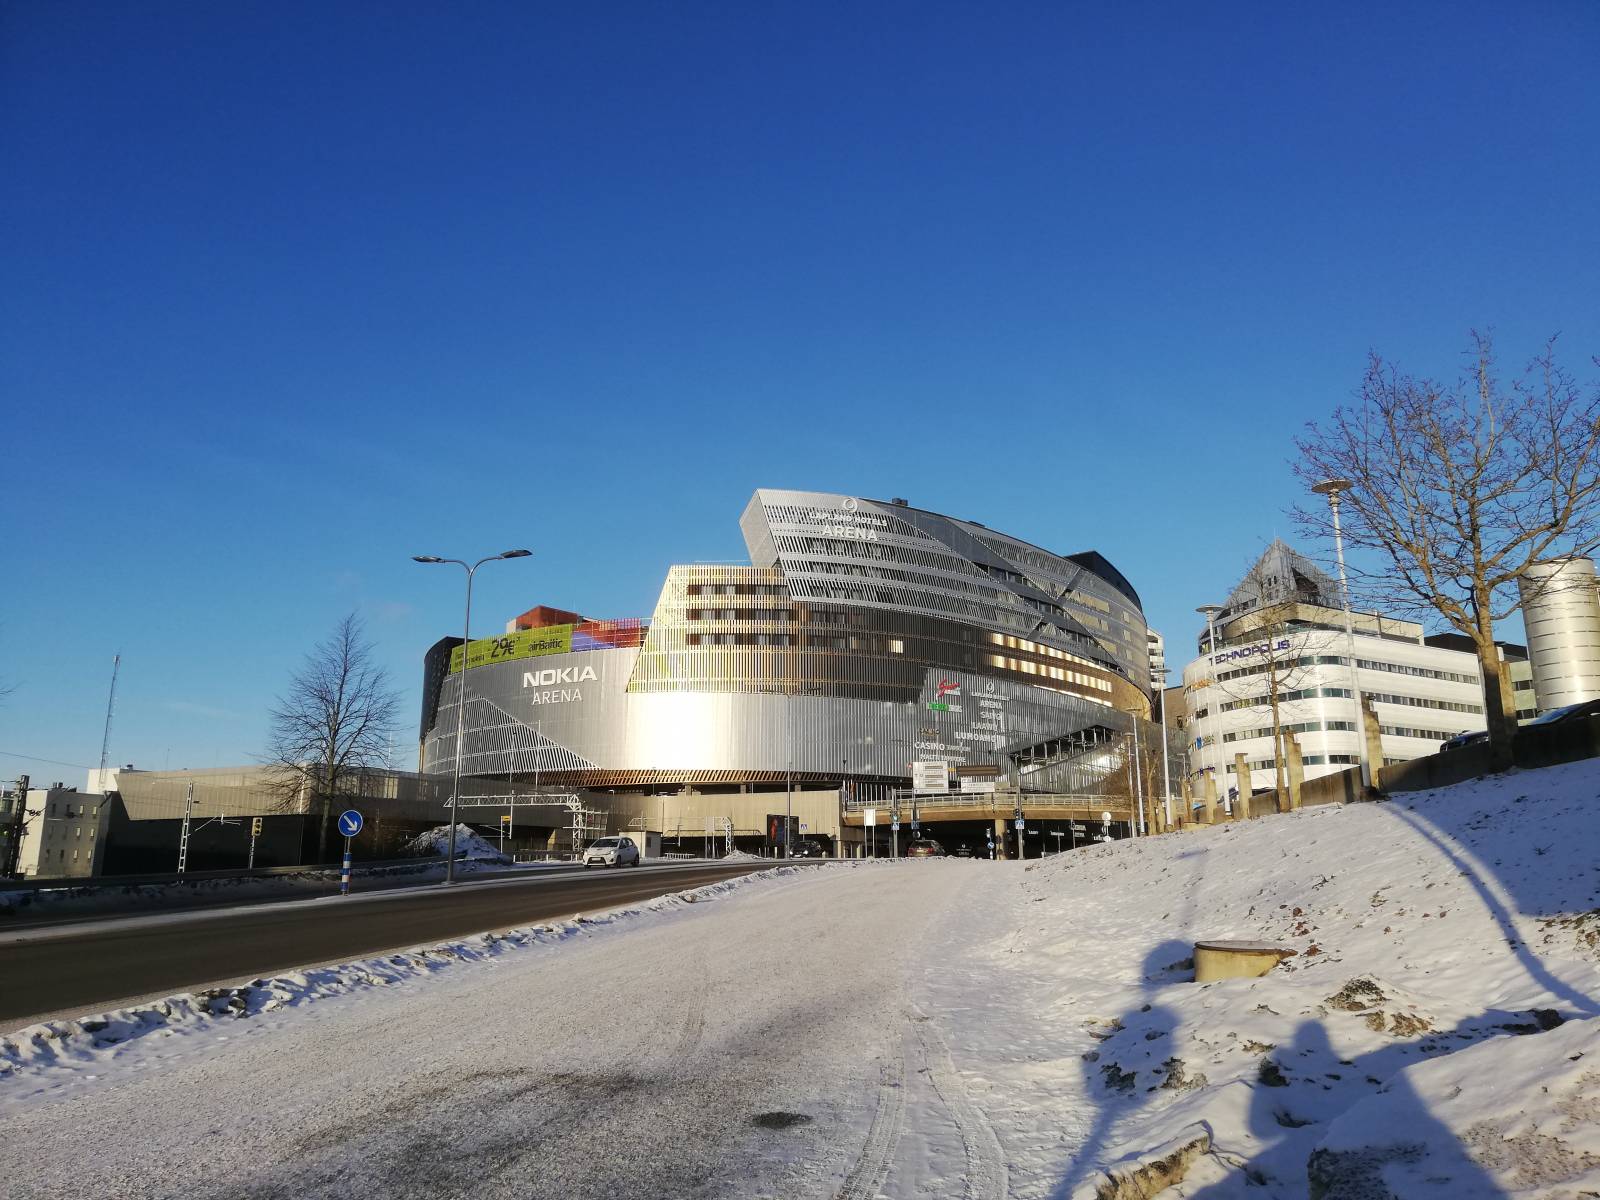 A picture of the Nokia Arena from the university on a beautiful winter day.